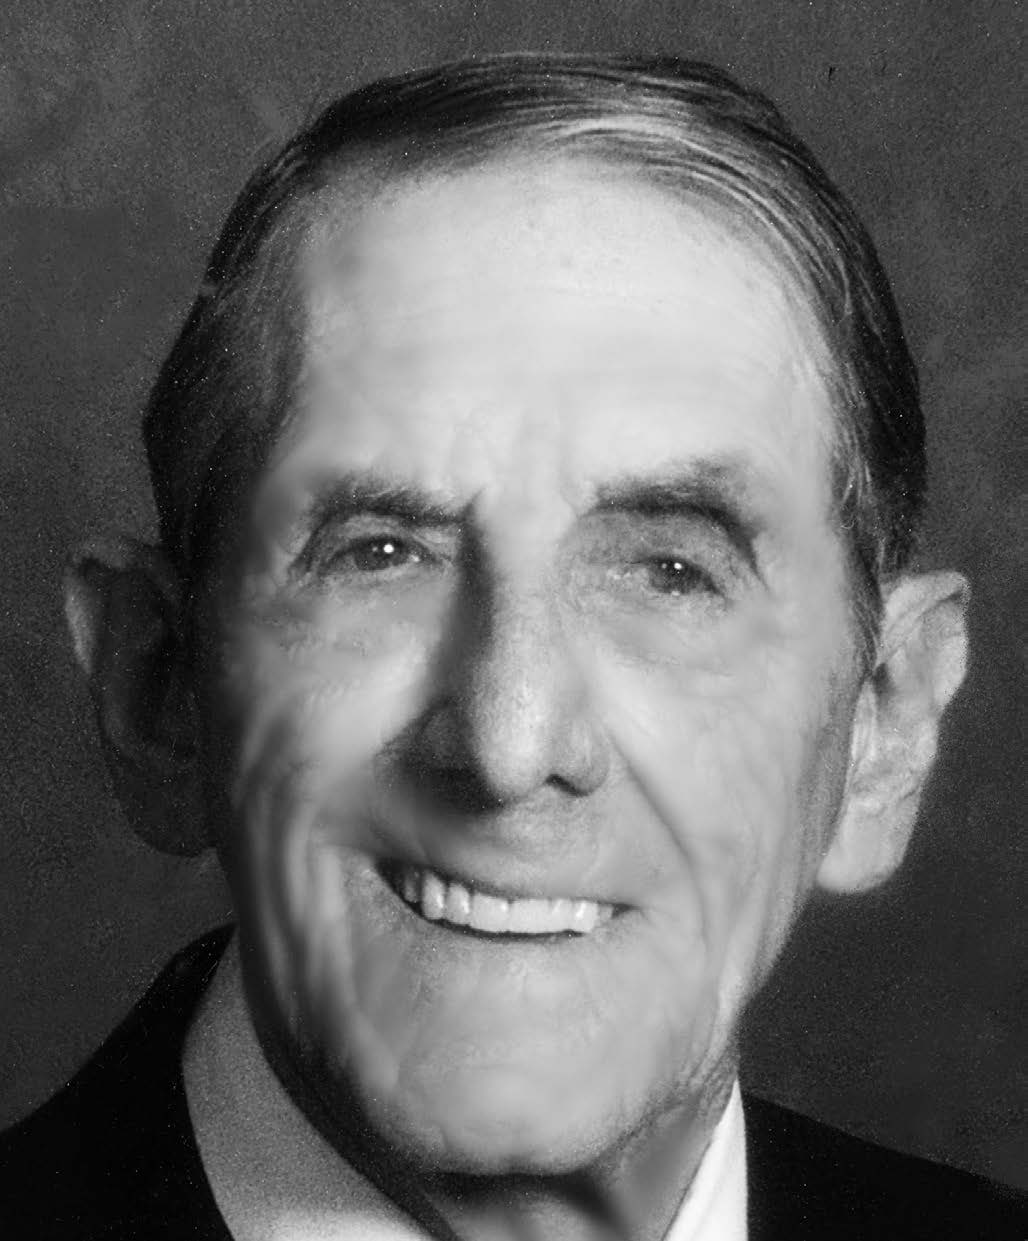 The Late Harold Alper, MD, Beloved Physician and Humanitarian